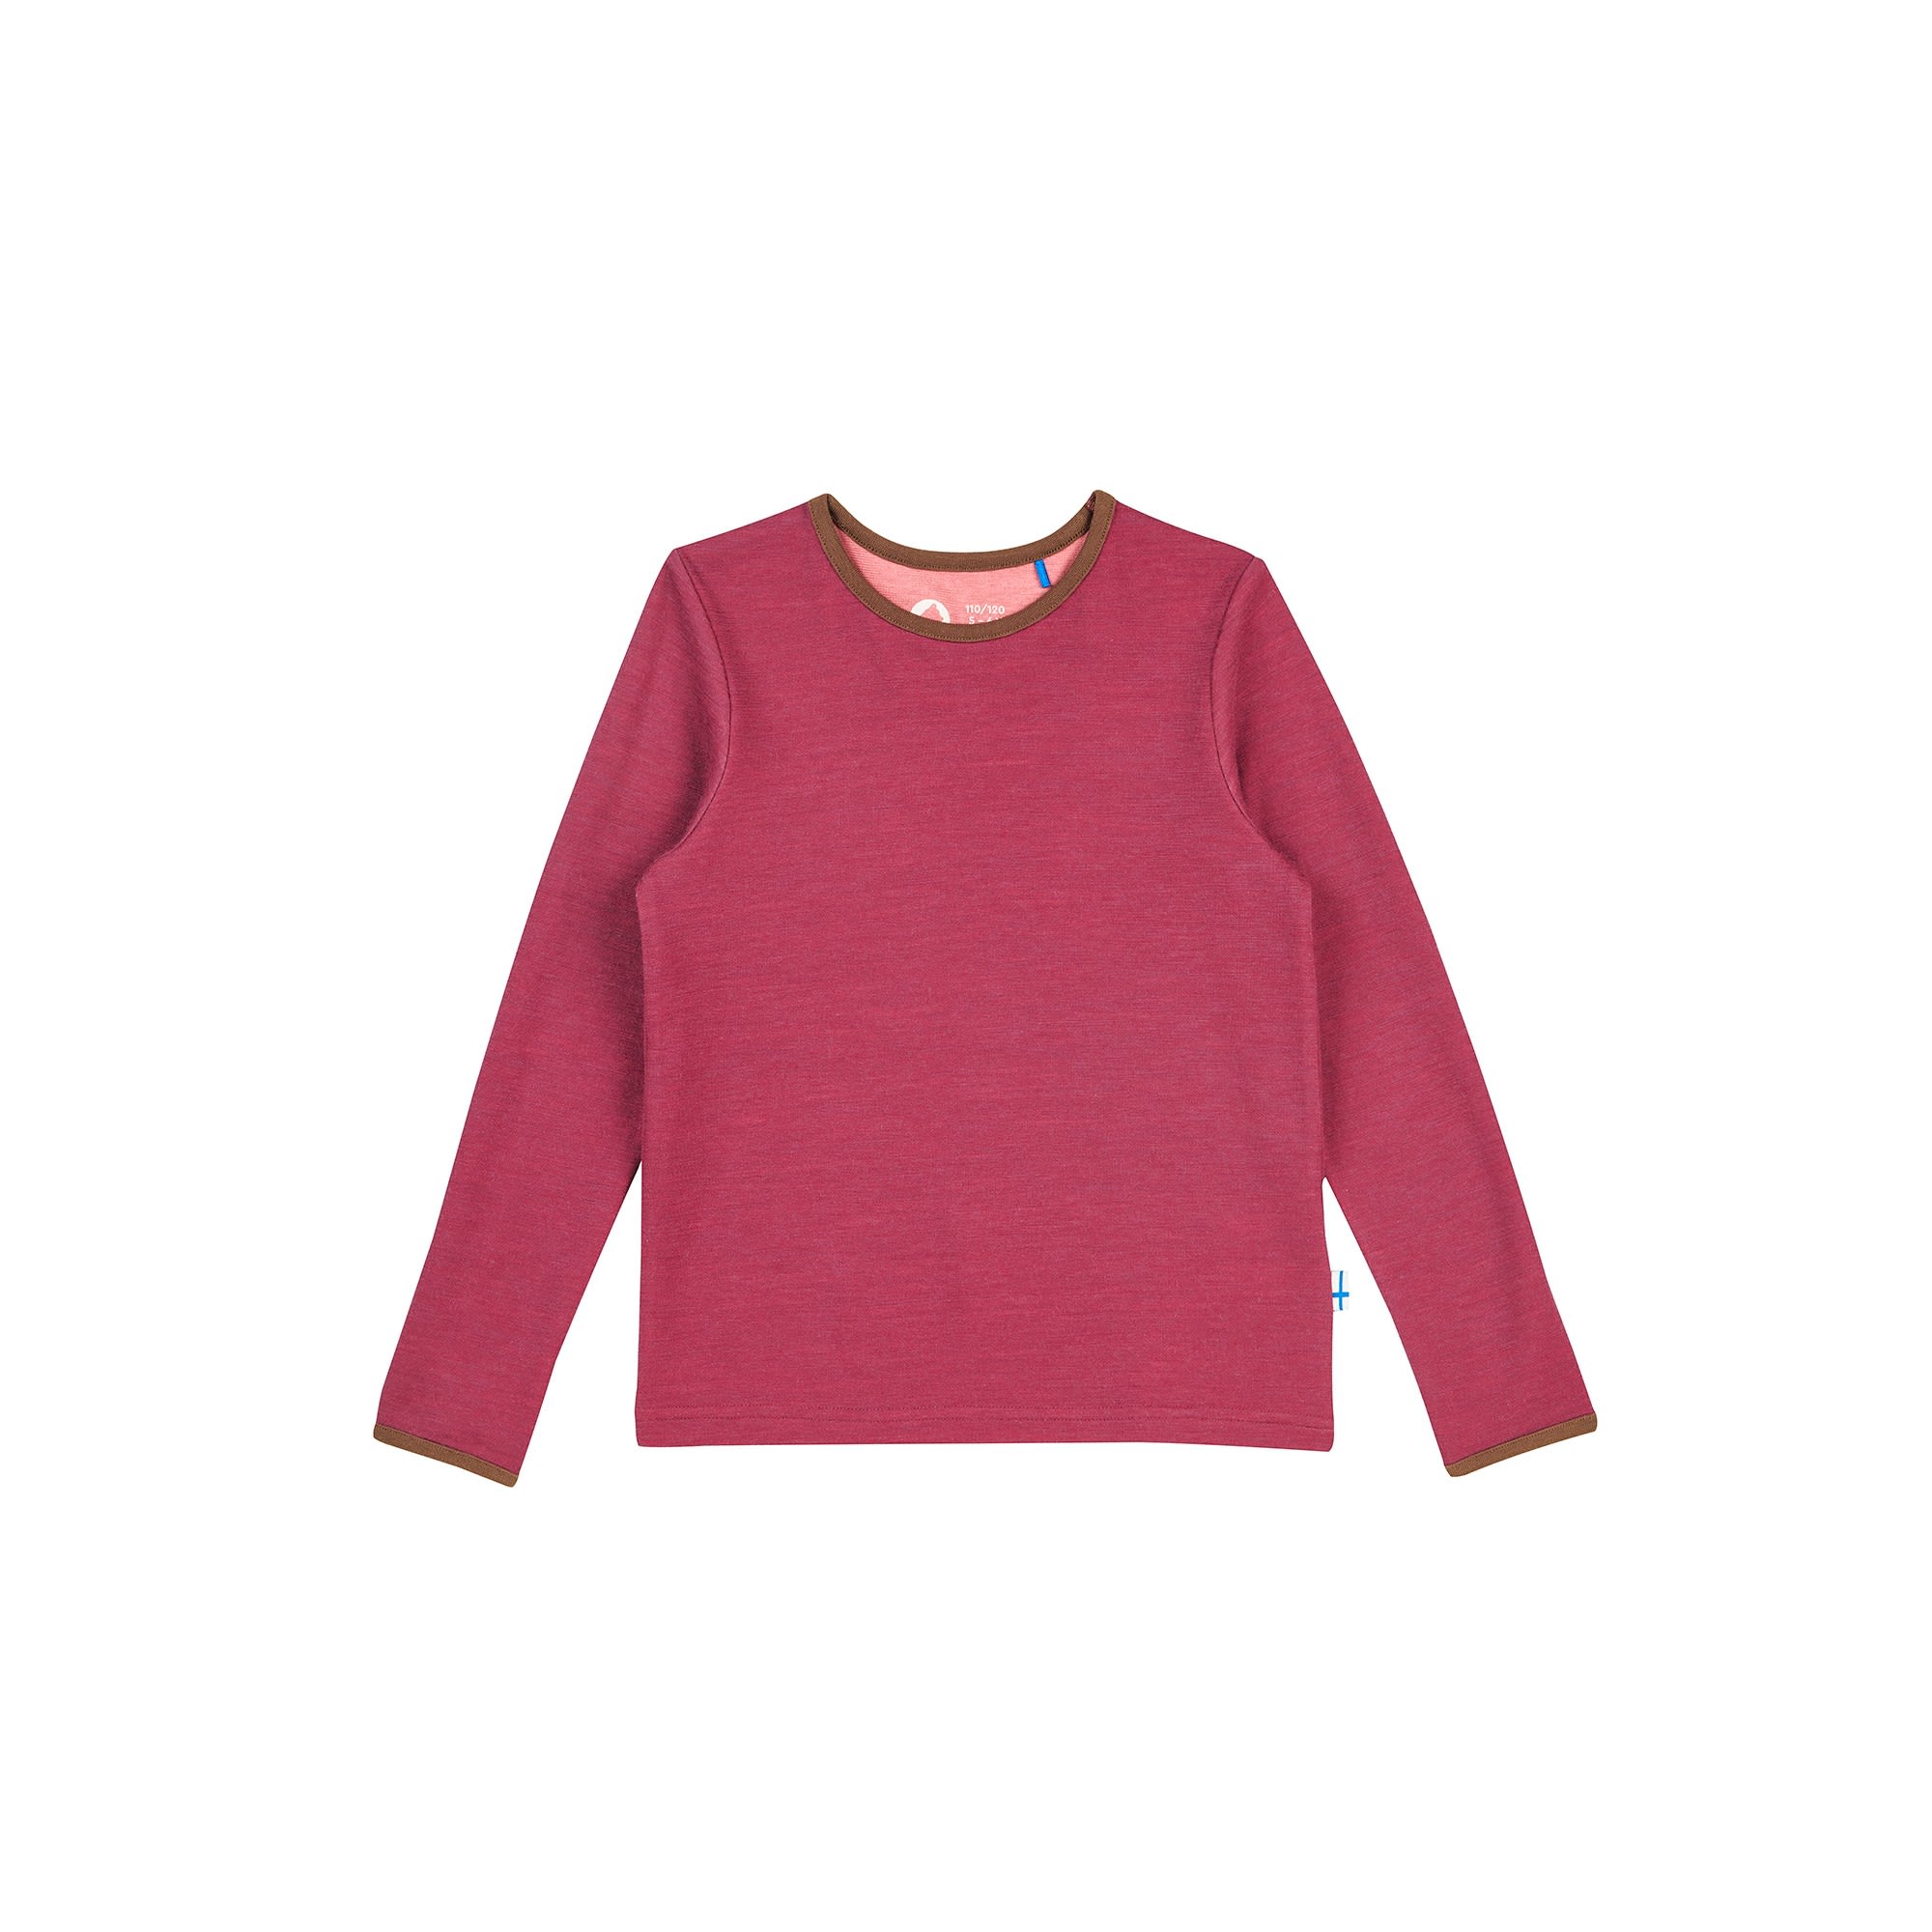 Finkid Bequemes warmes Kinder Wolljersey Langarmshirt Beet Red - Cocoa